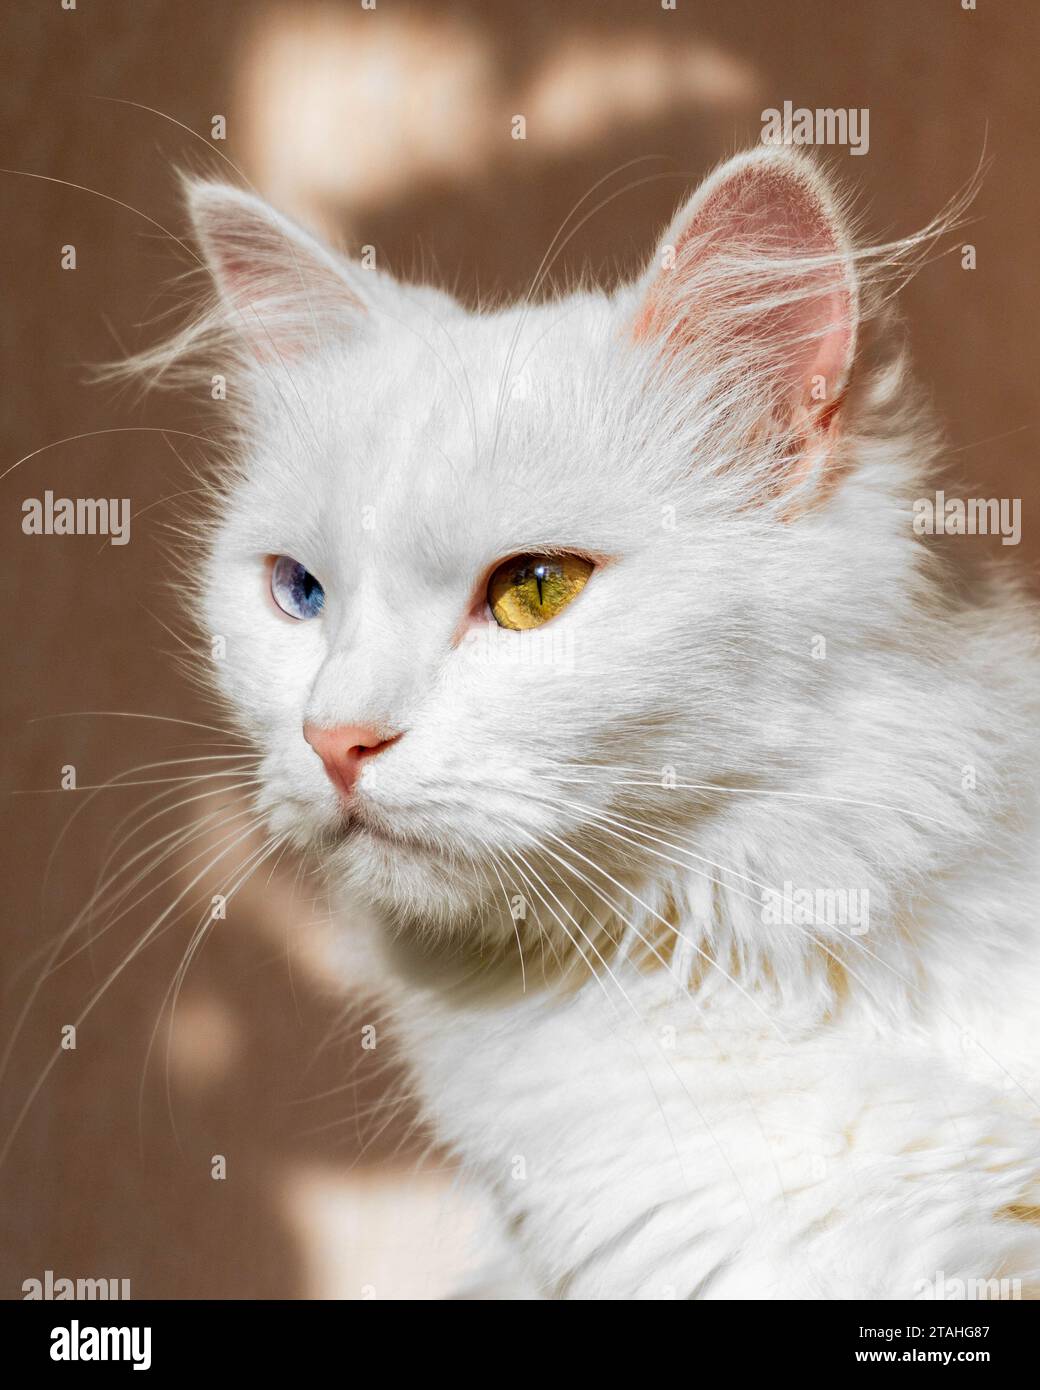 Portrait of a fluffy white Turkish Angora cat with different eyes Stock Photo